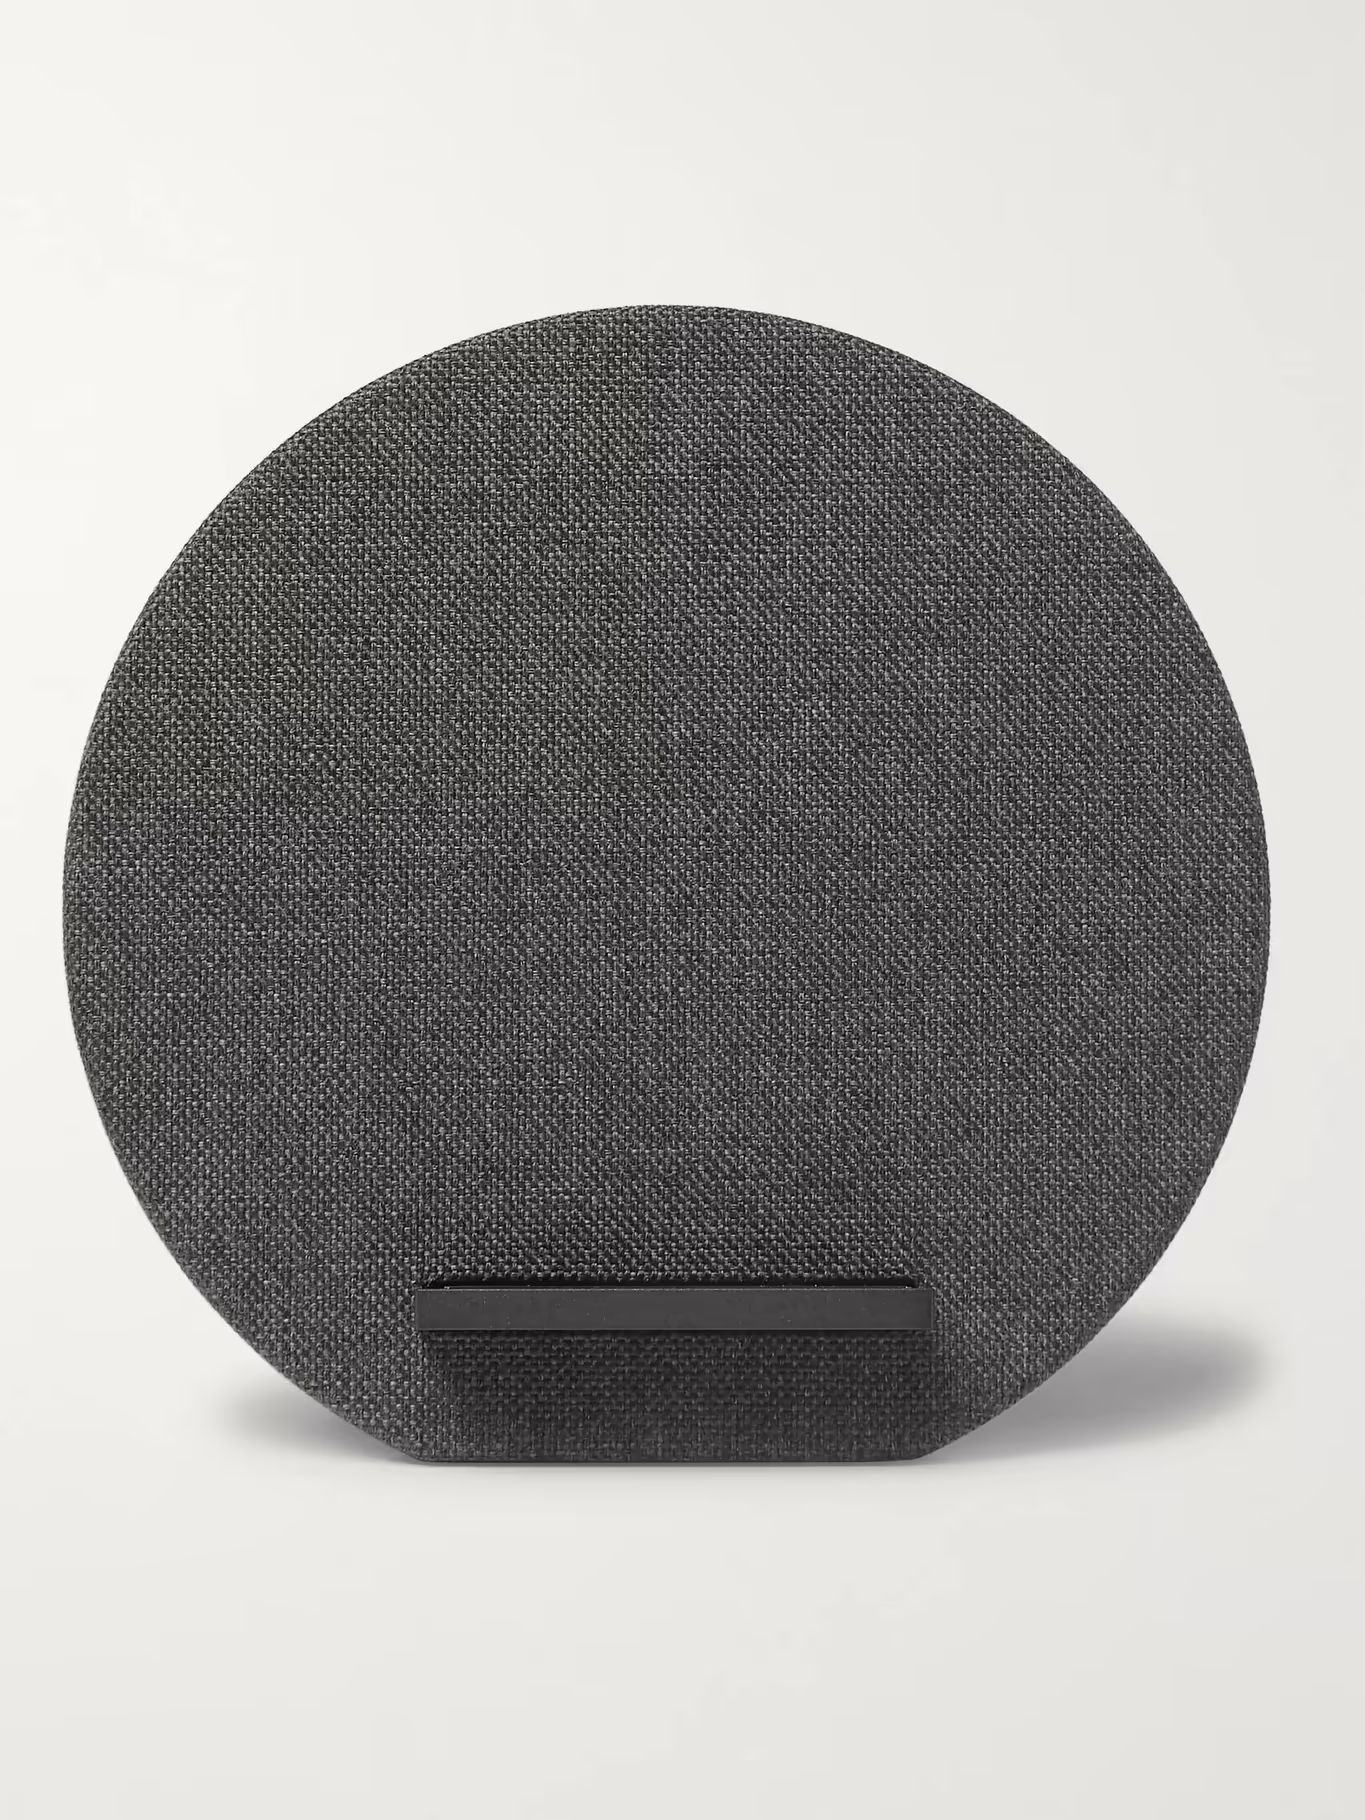 Dock Wireless Charger | Mr Porter (US & CA)